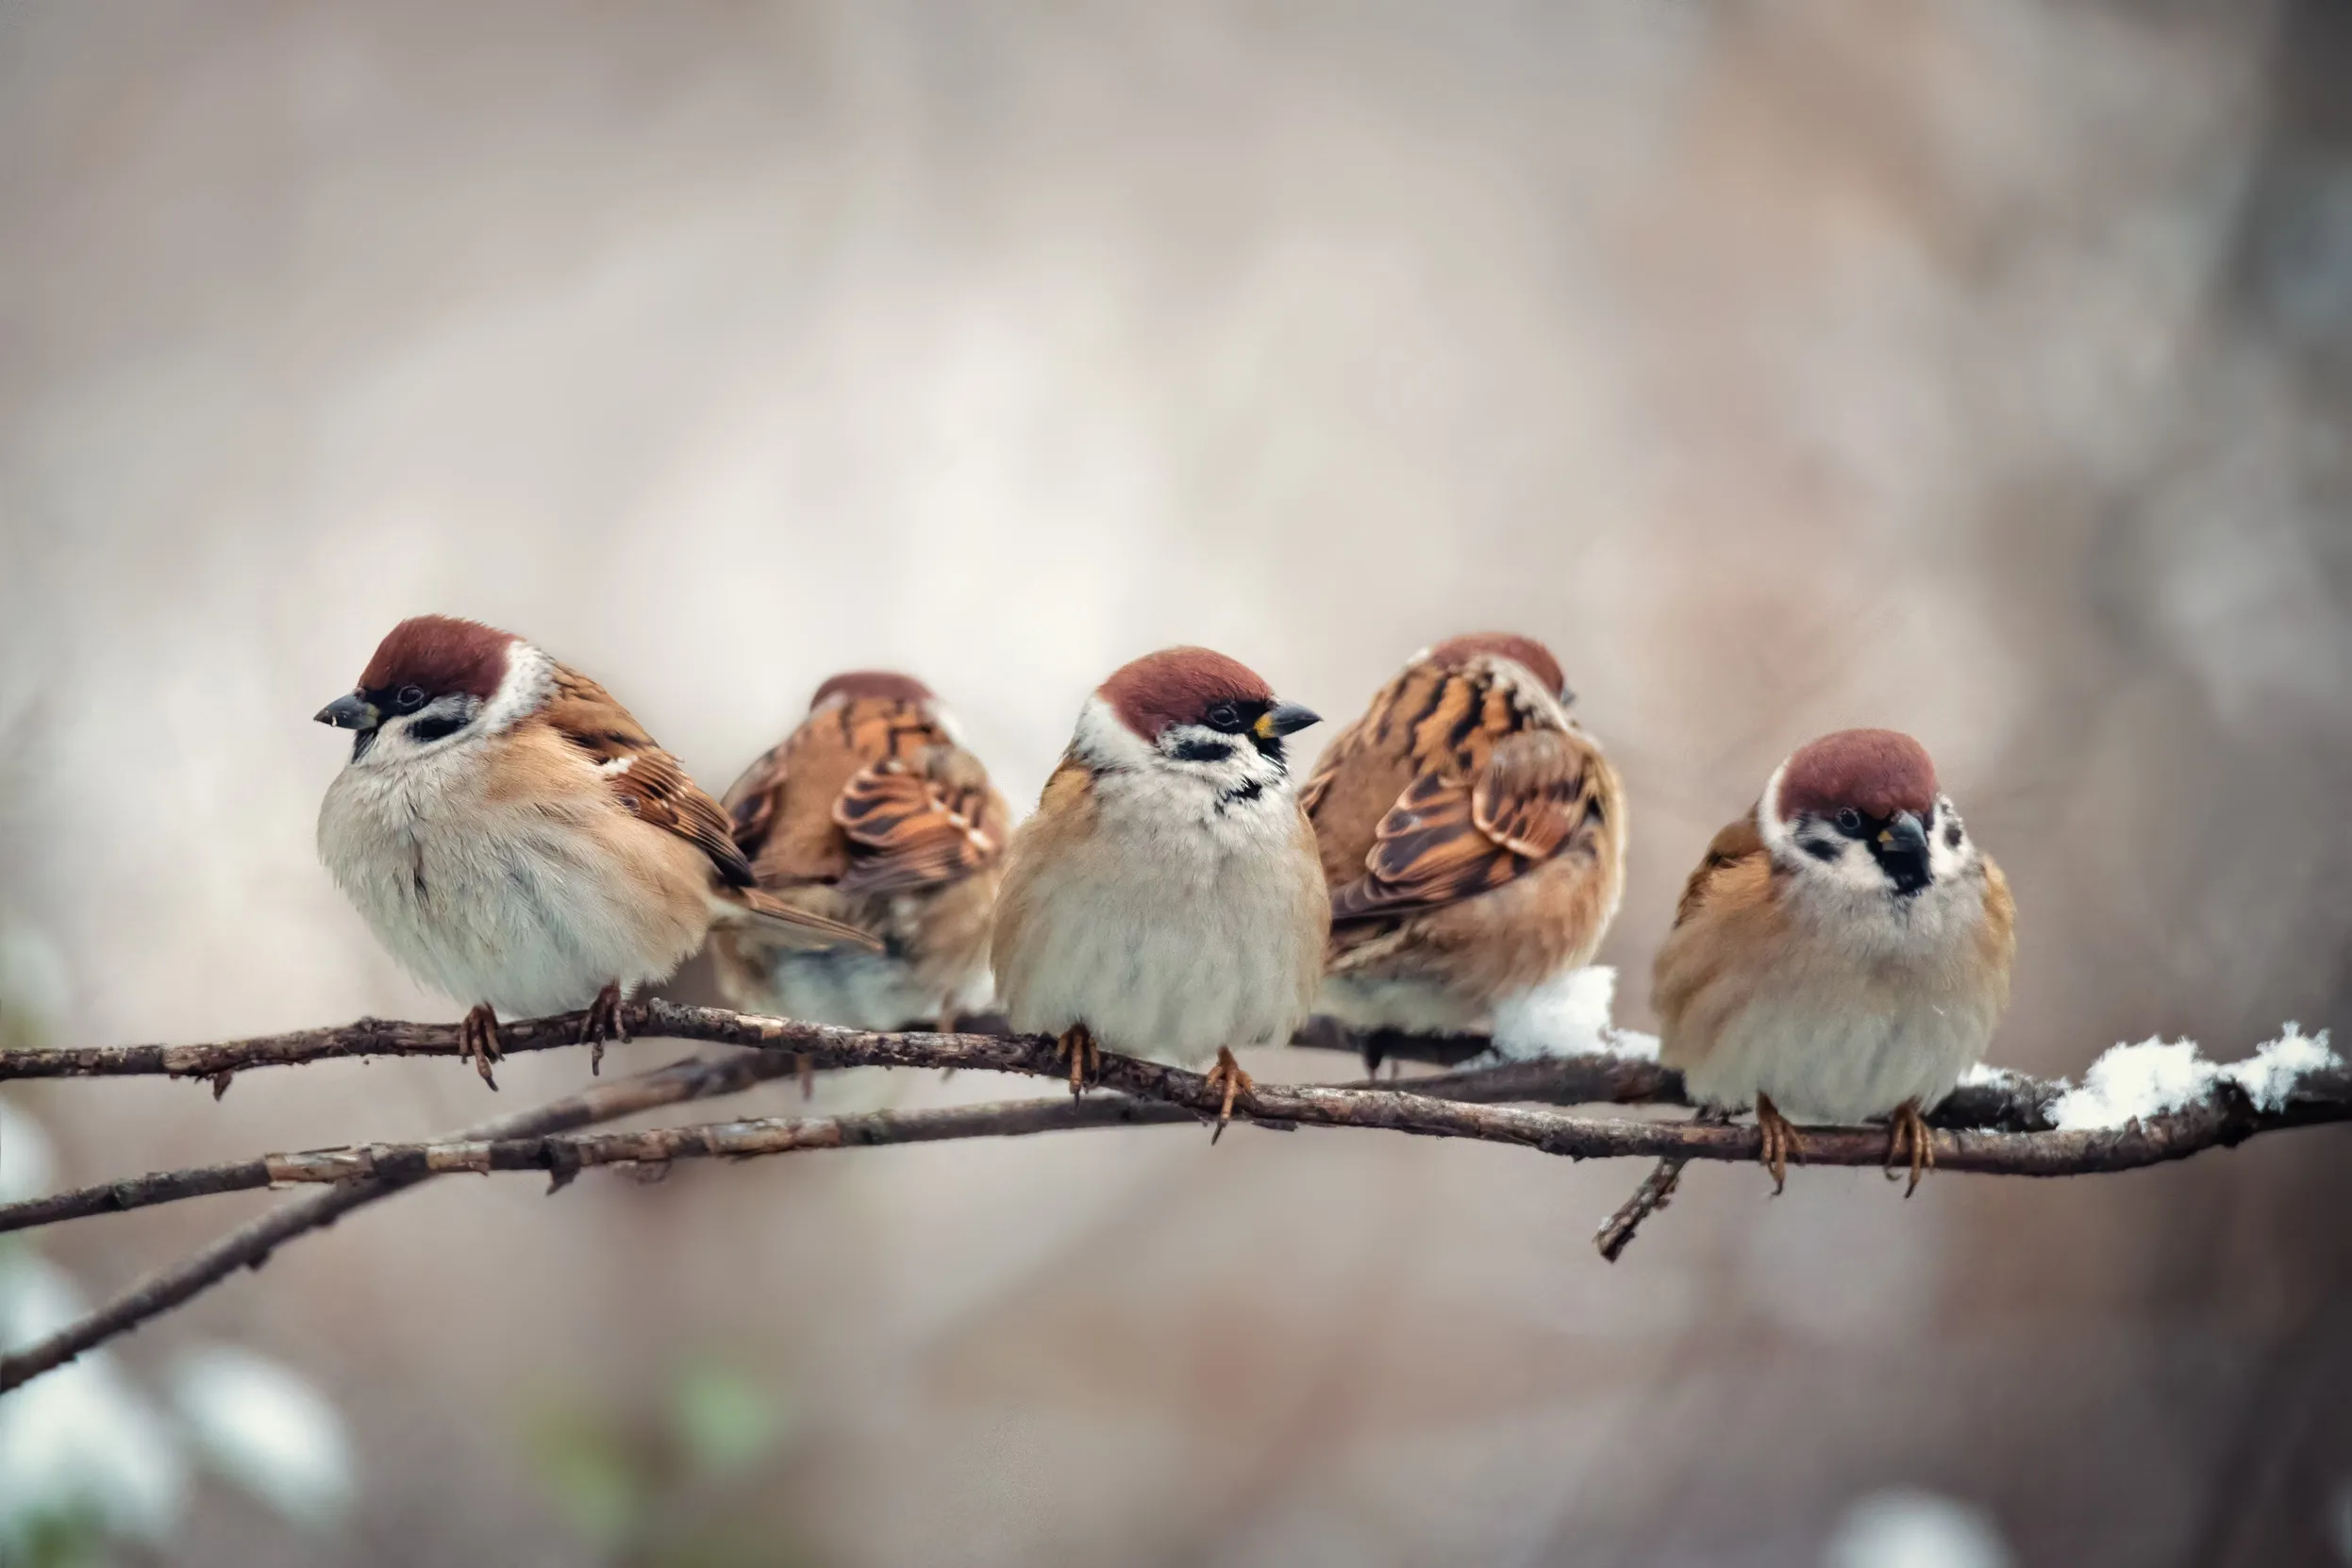 A group of five Tree Sparrows perched together on a snow covered branch.